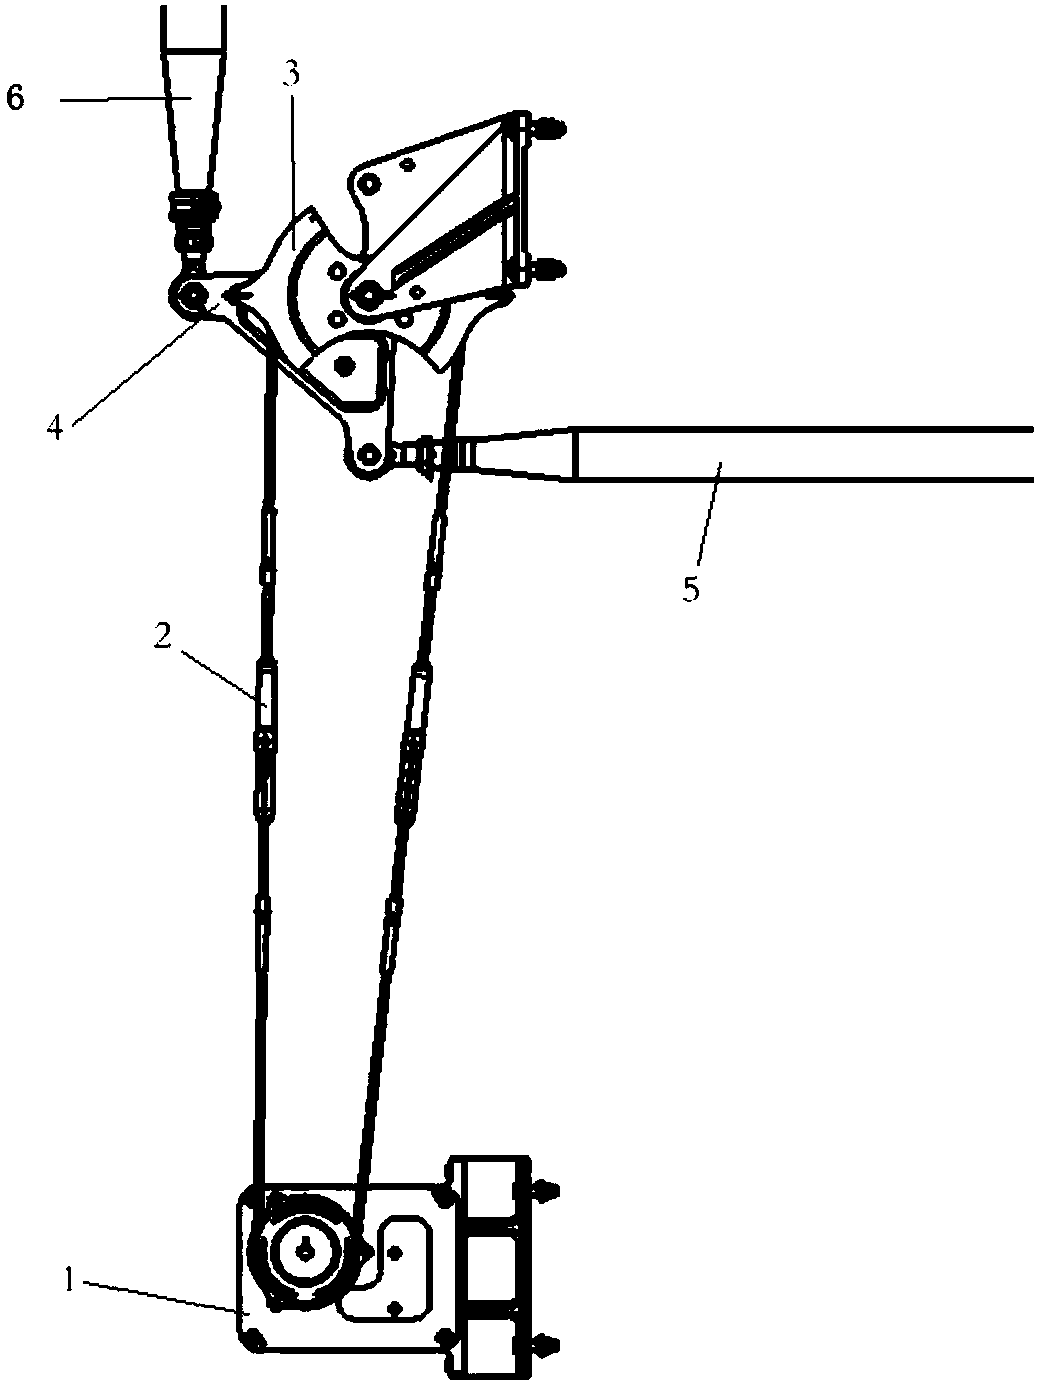 Stall protection control system of aircraft